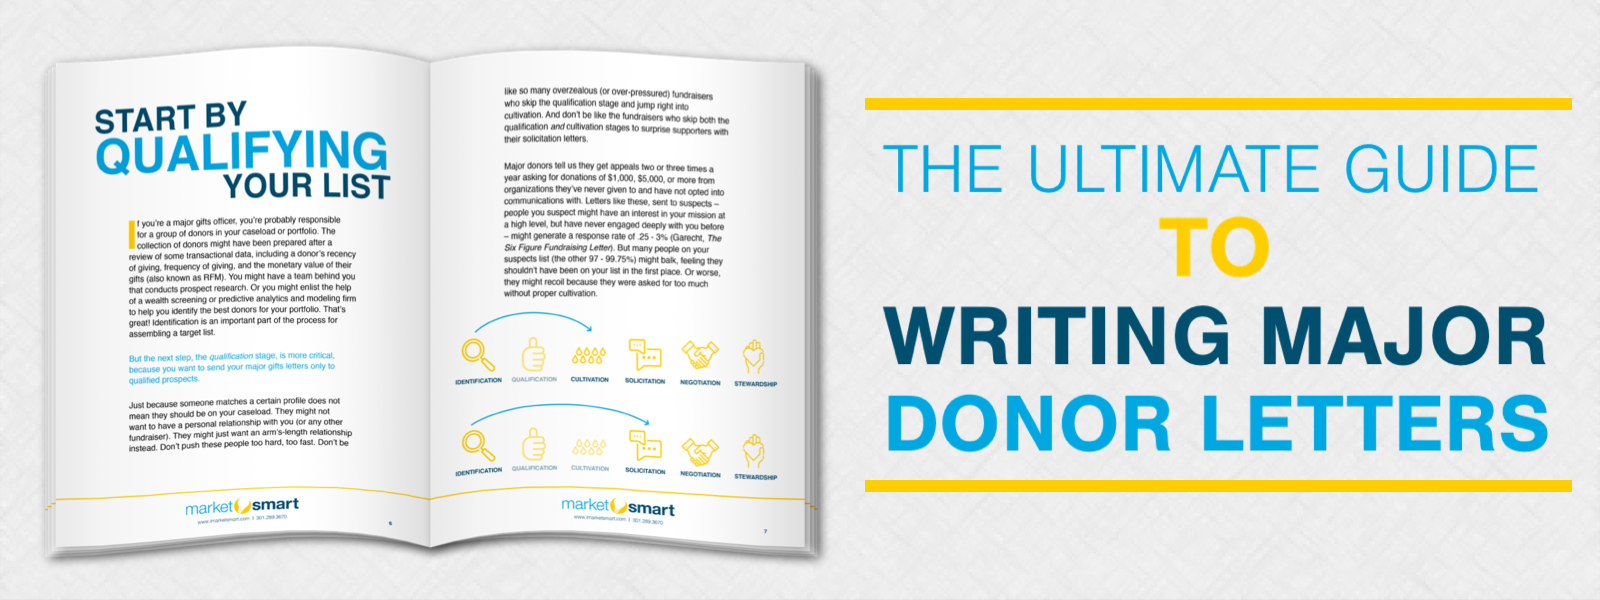 The Ultimate Guide to Writing Major Donor Letters - MarketSmart